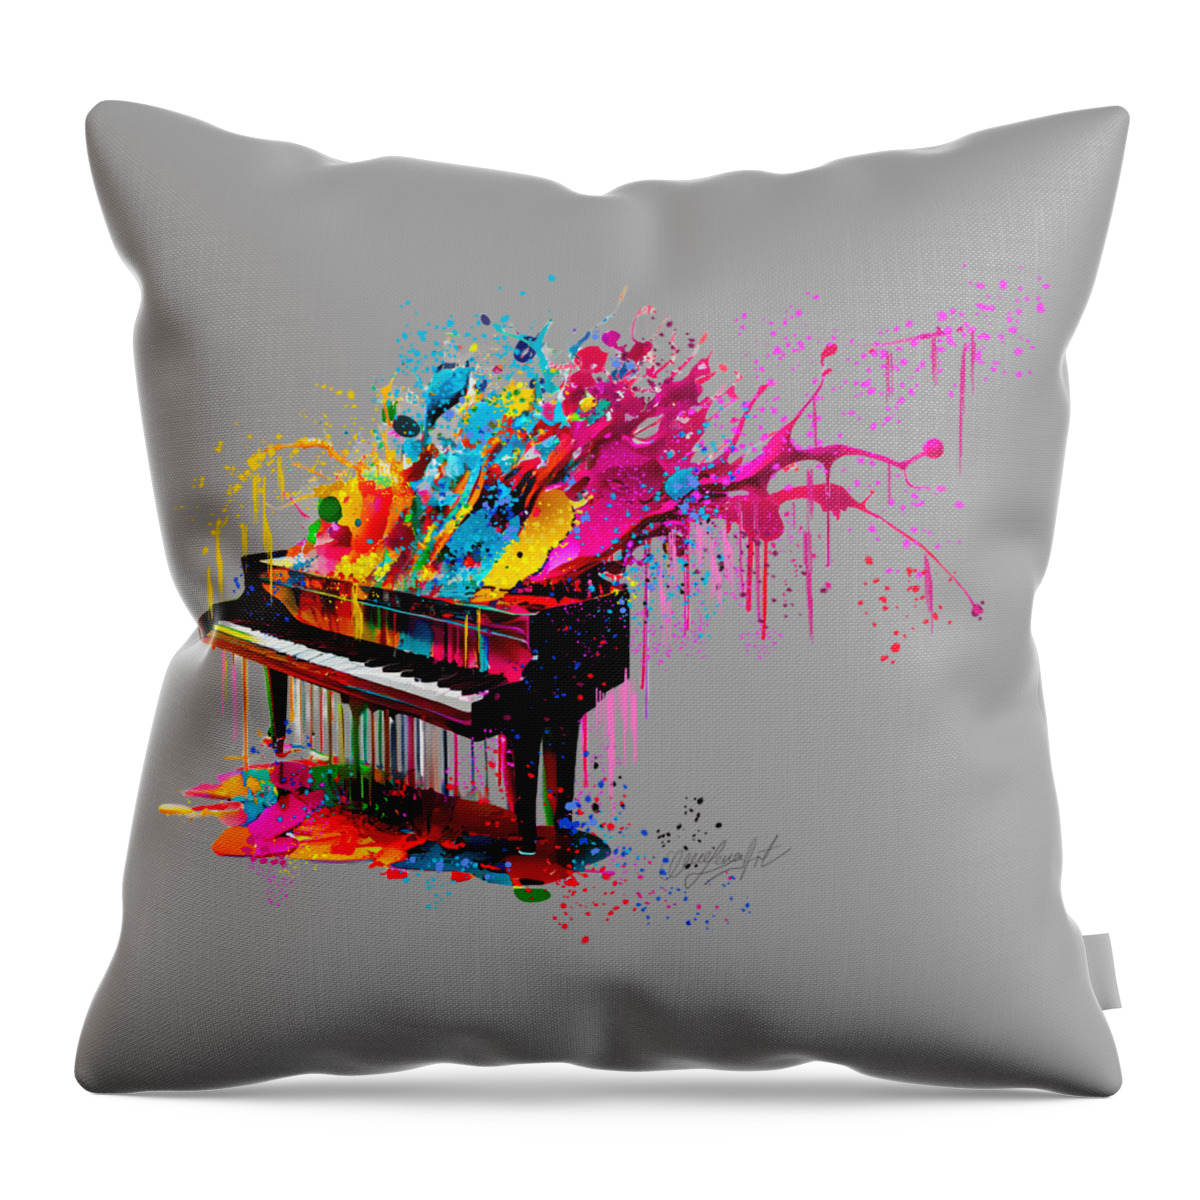 Piano Throw Pillow featuring the digital art Piano, the Music Culmination in Color by Lena Owens - OLena Art Vibrant Palette Knife and Graphic Design